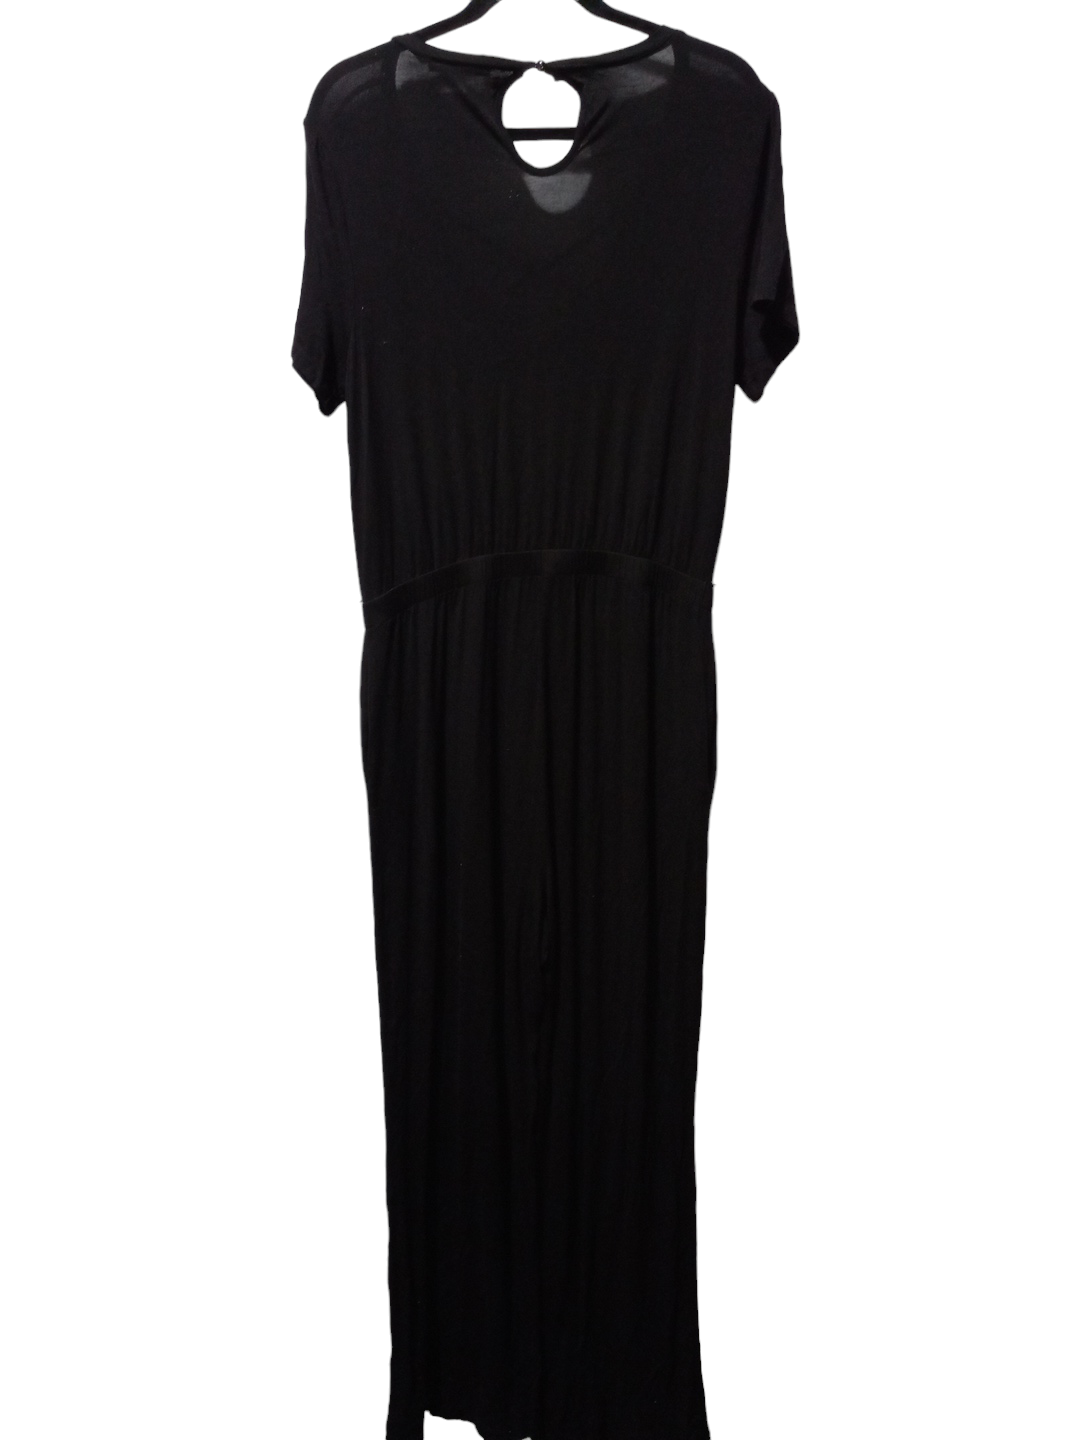 Black Jumpsuit New York And Co, Size L